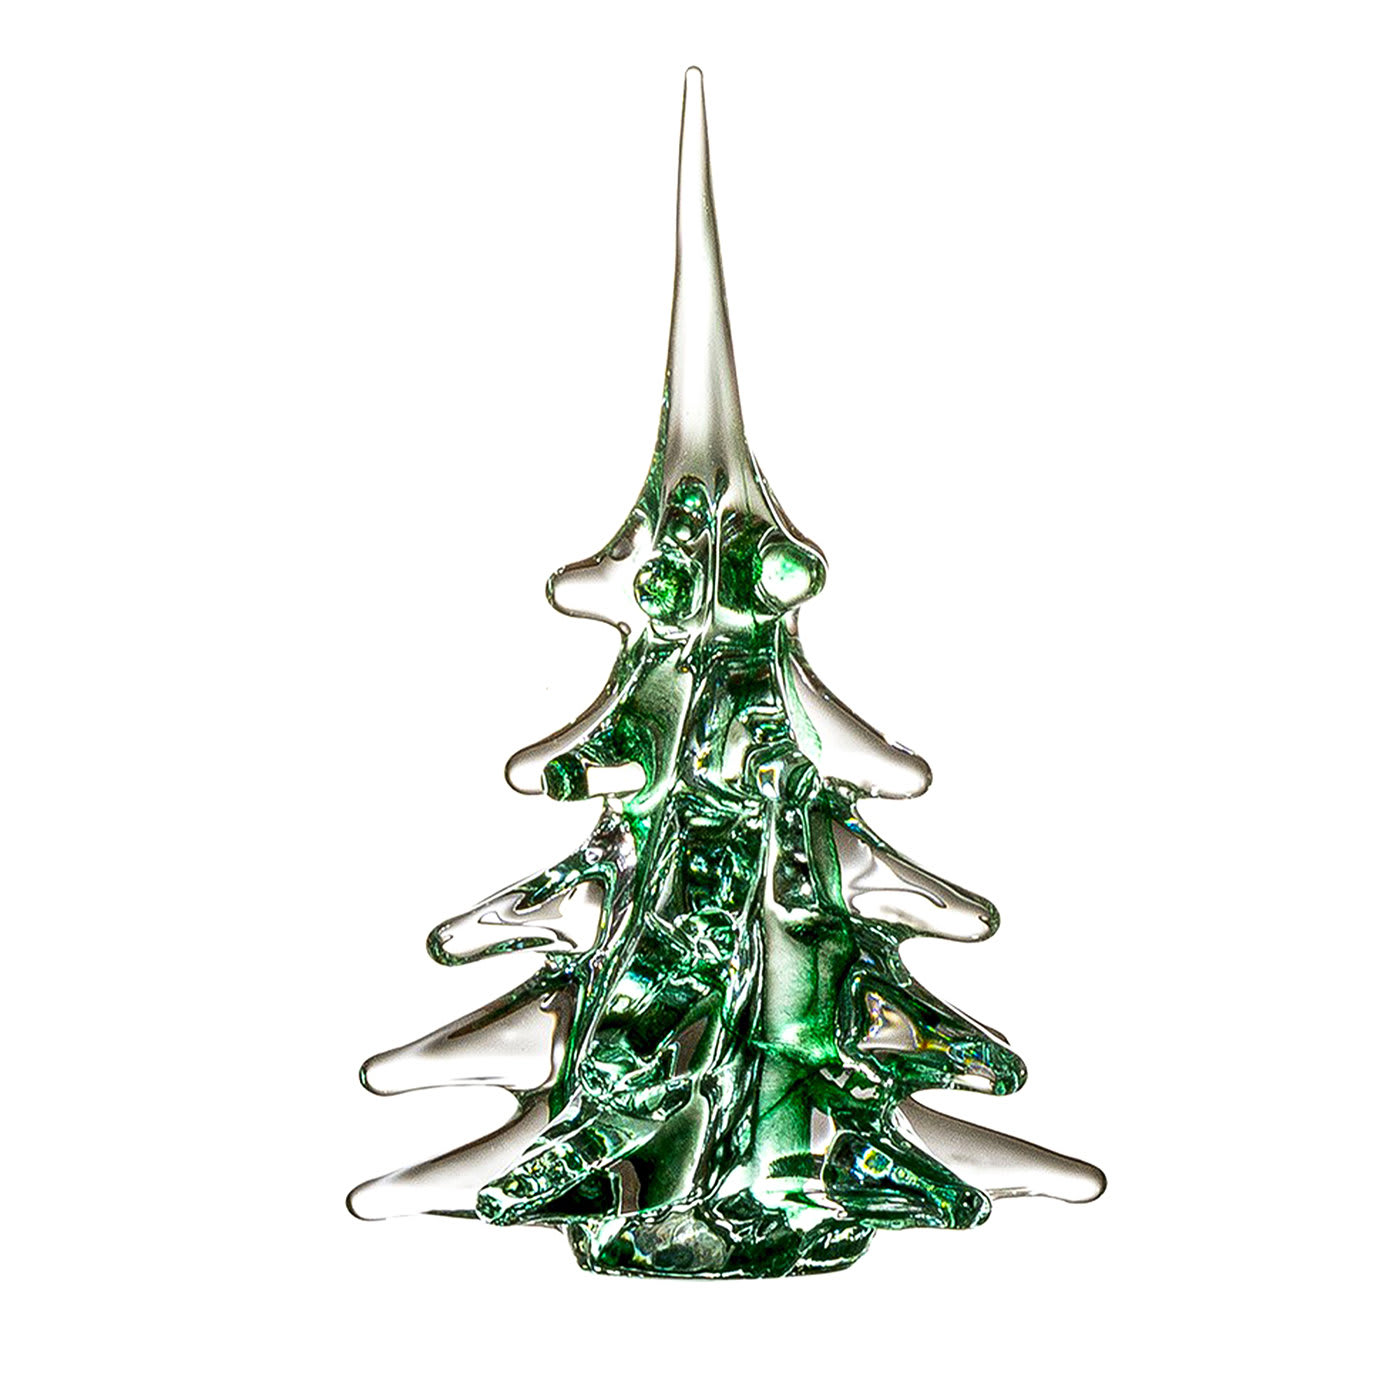 Extra-Tall Green Christmas Tree Ornament by Marcolin - Cristalleria ColleVilca